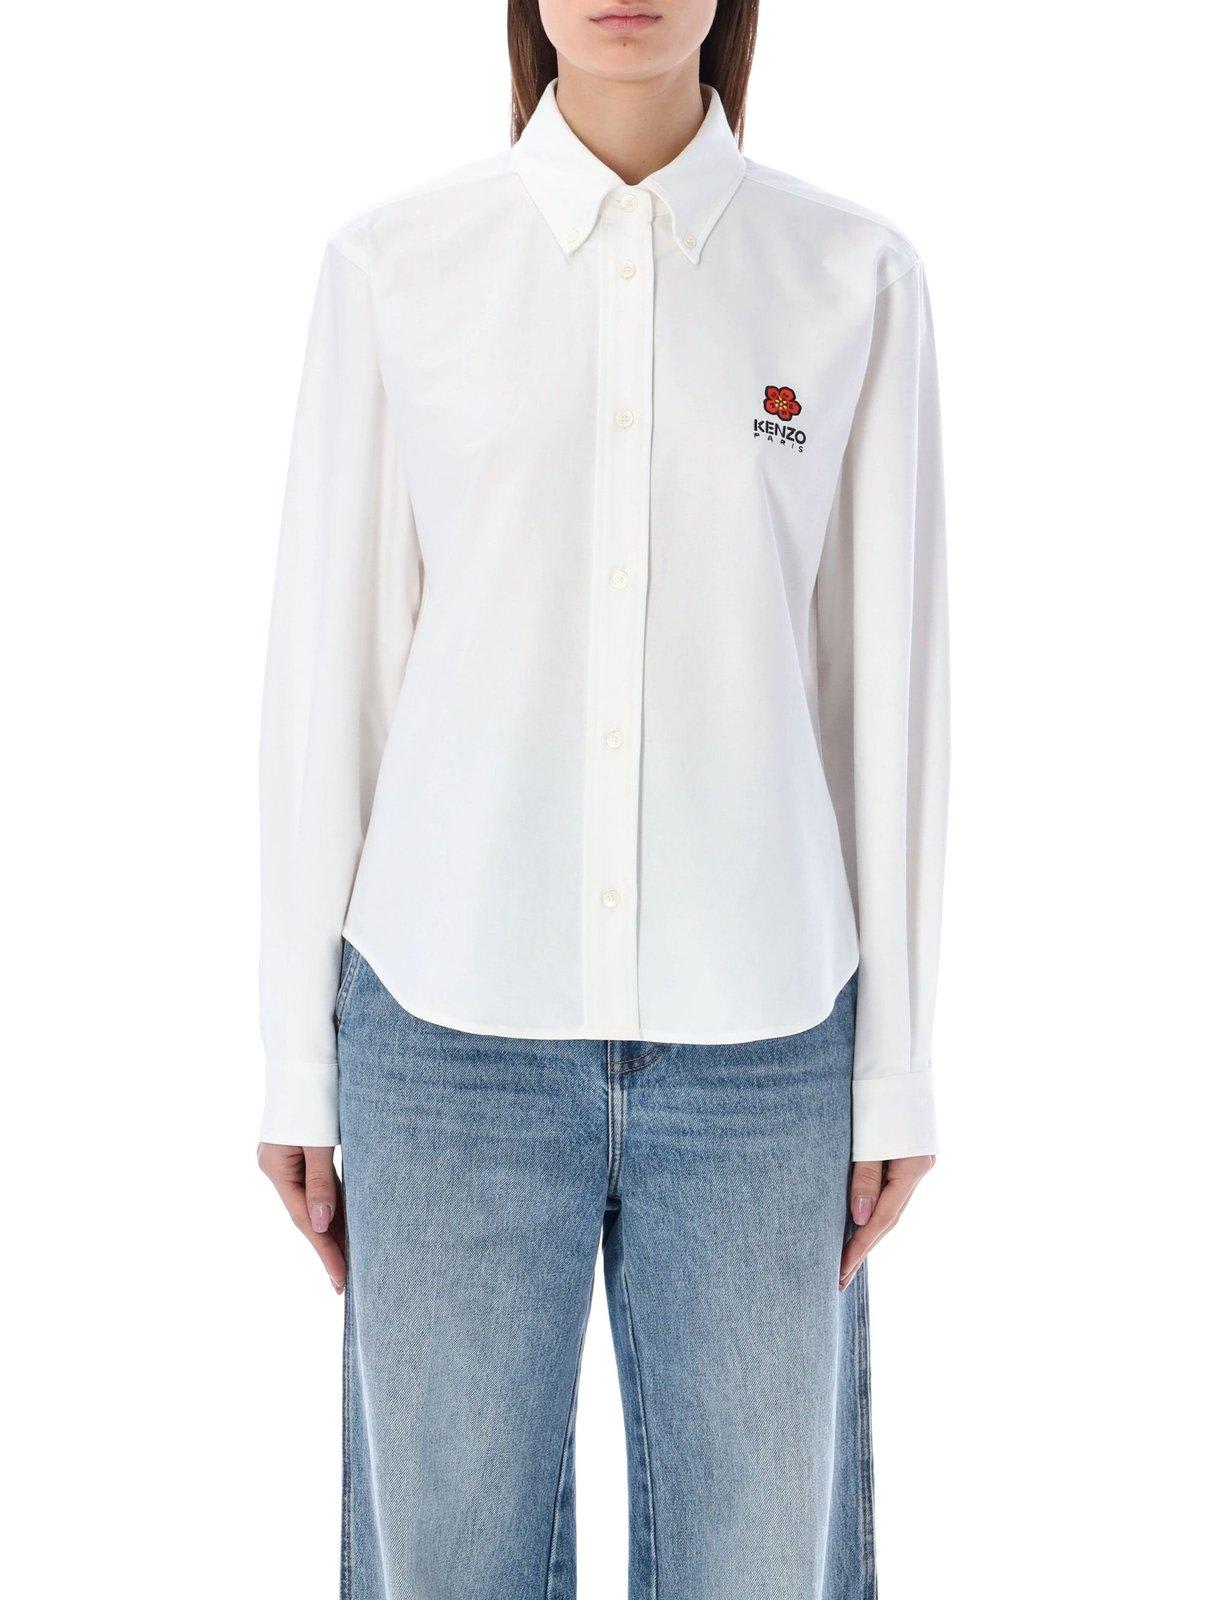 KENZO LOGO EMBROIDERED BUTTONED SHIRT